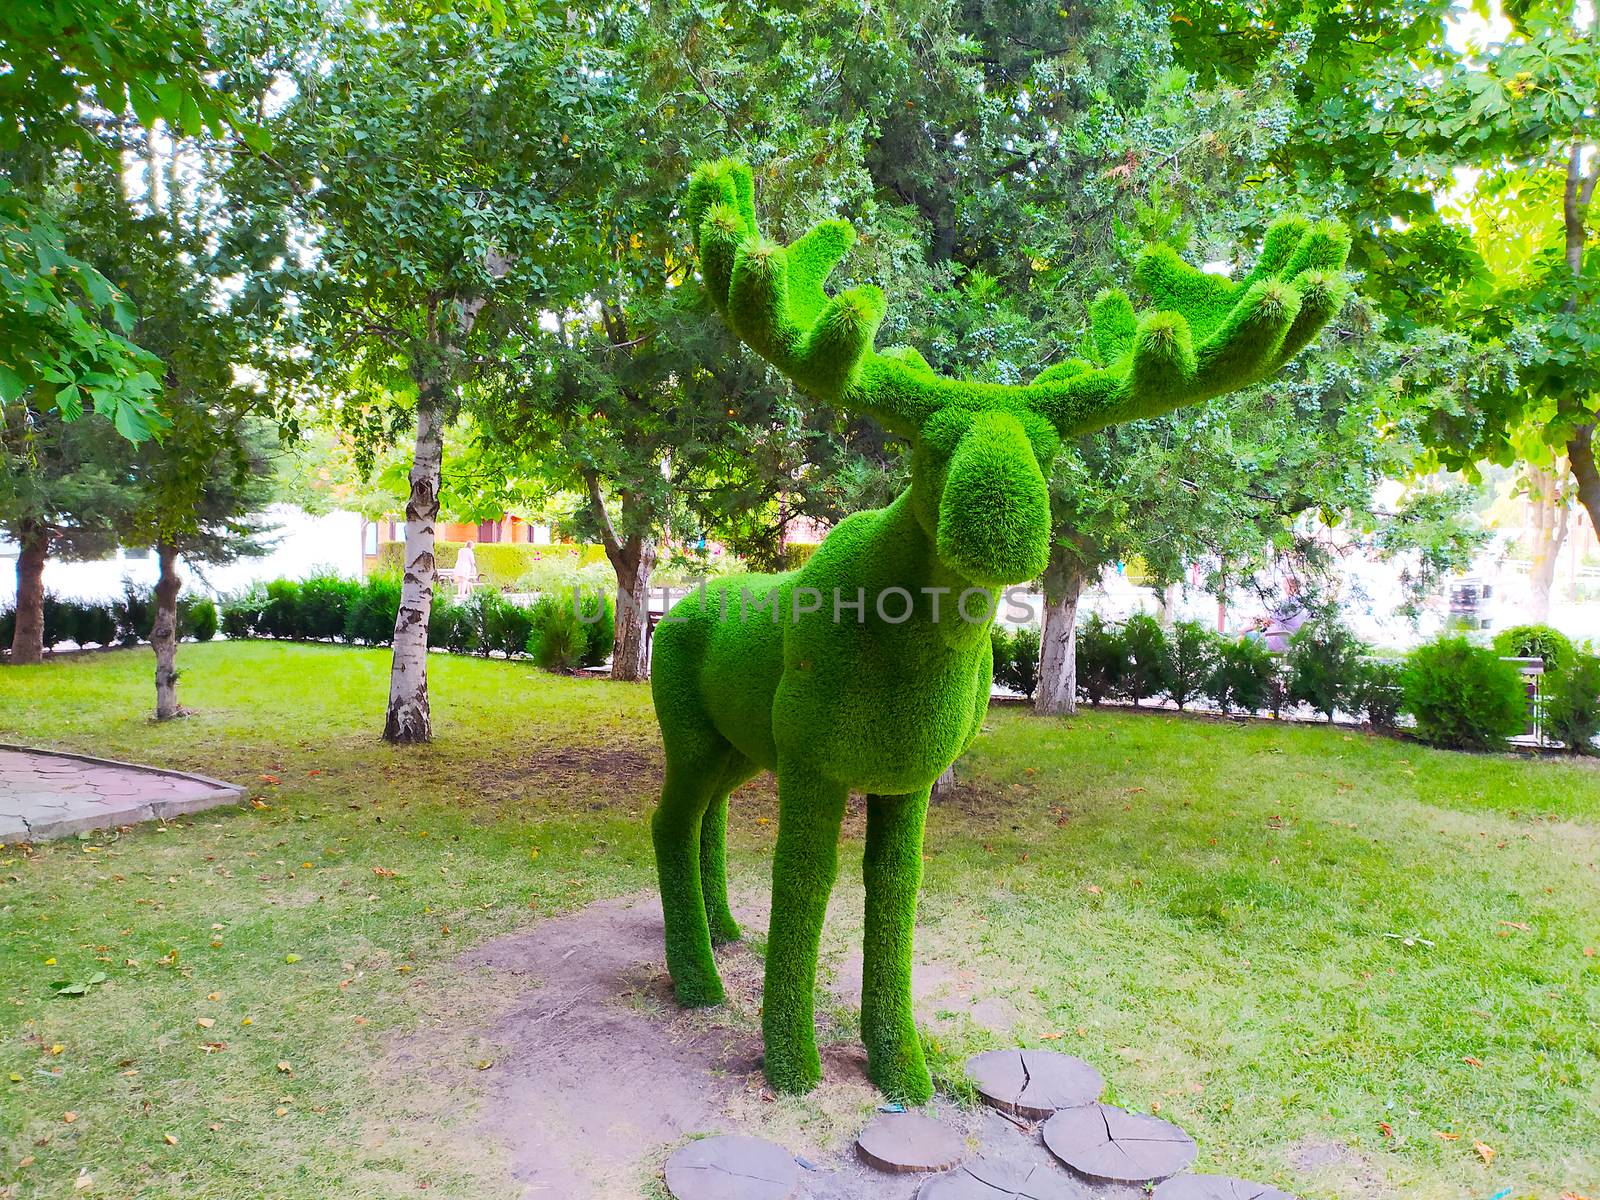 Sculpture of a deer with horns in a green Park against a background of trees. by Igor2006